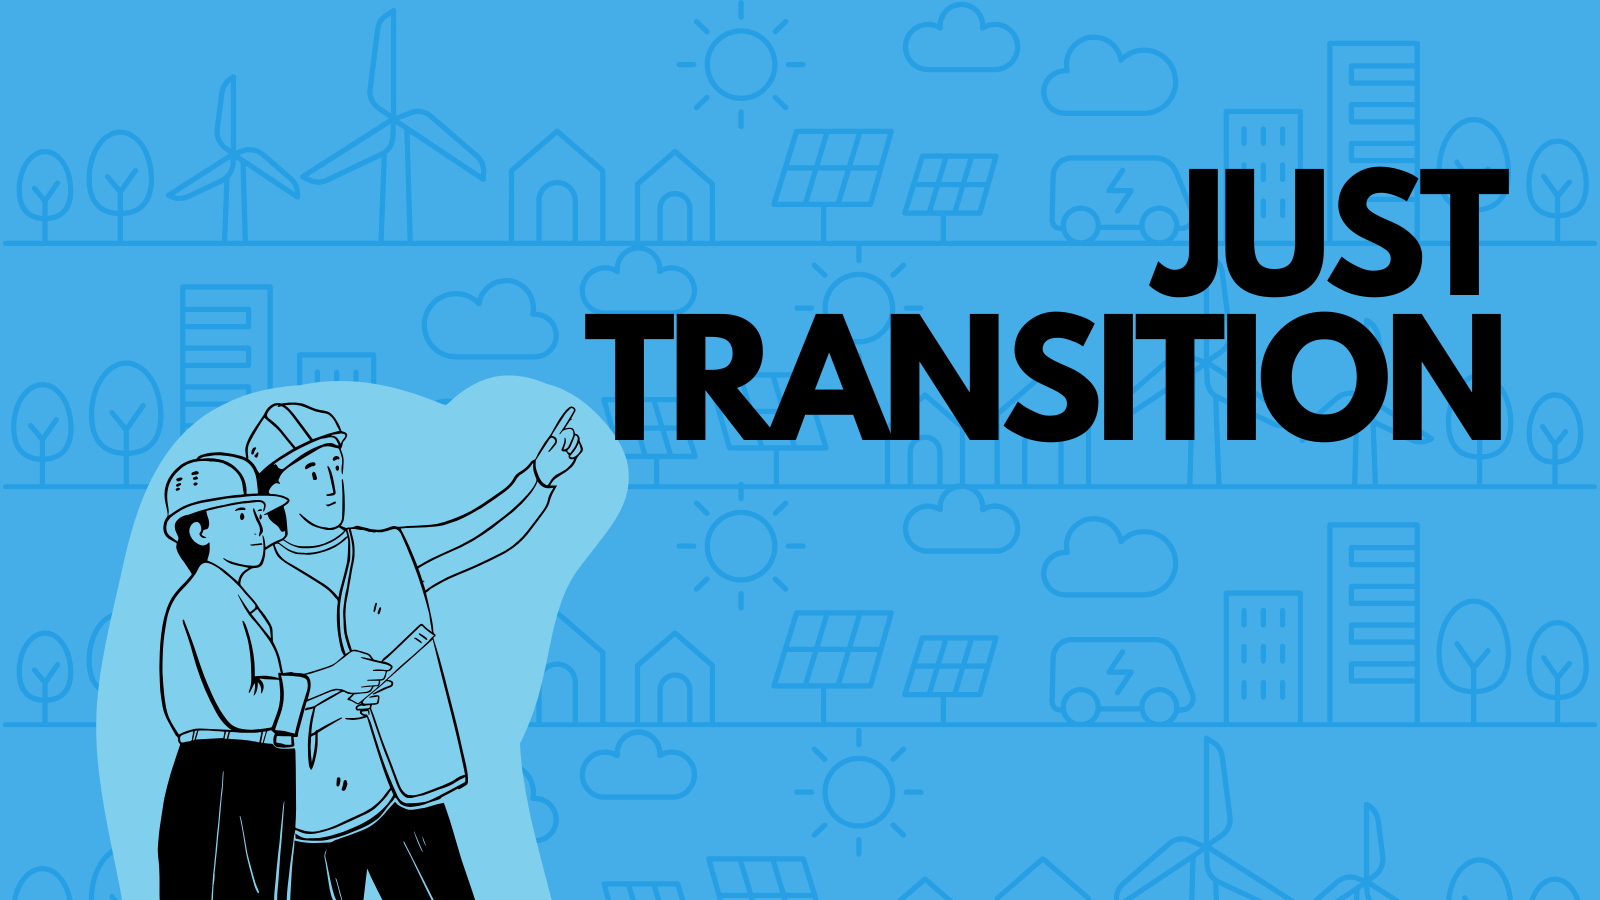 An illustration of two workers pointing towards text that says "Just Transition". End of image description.